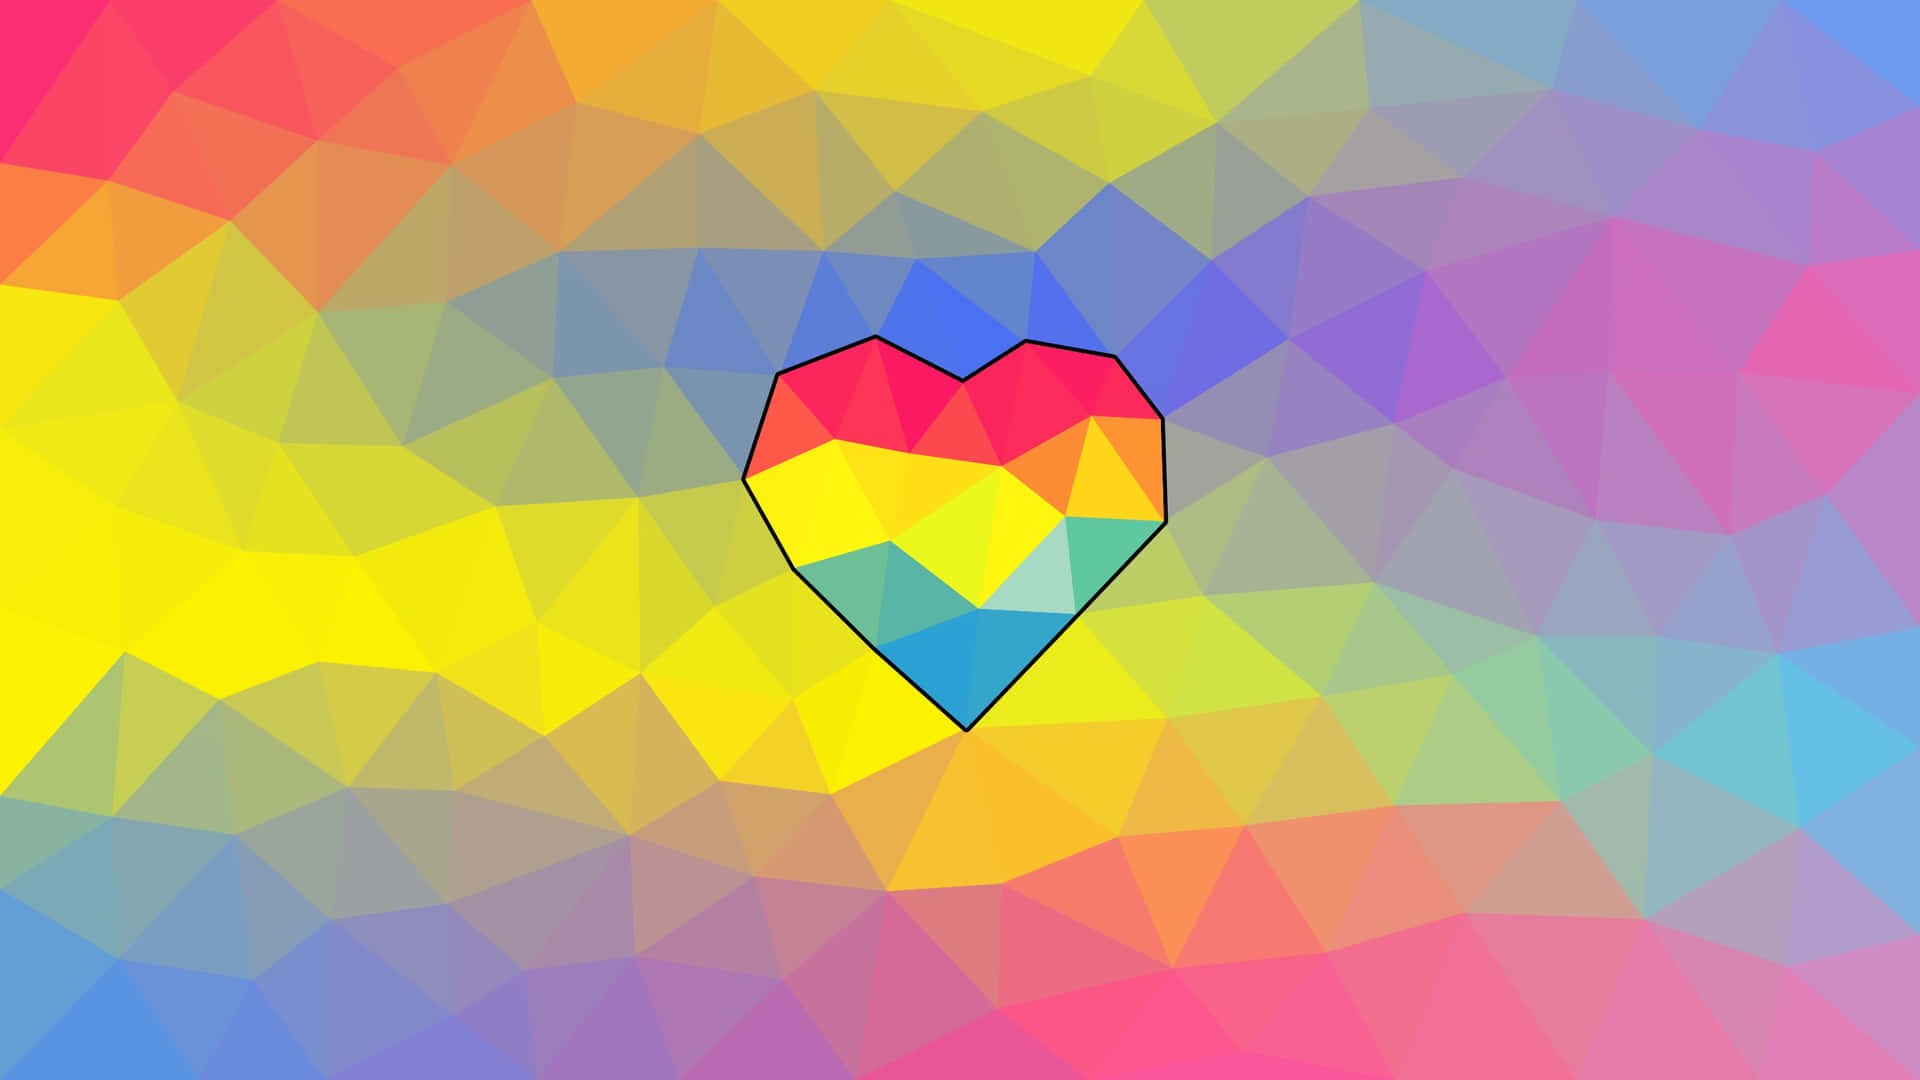 A Colorful Heart On A Colorful Background